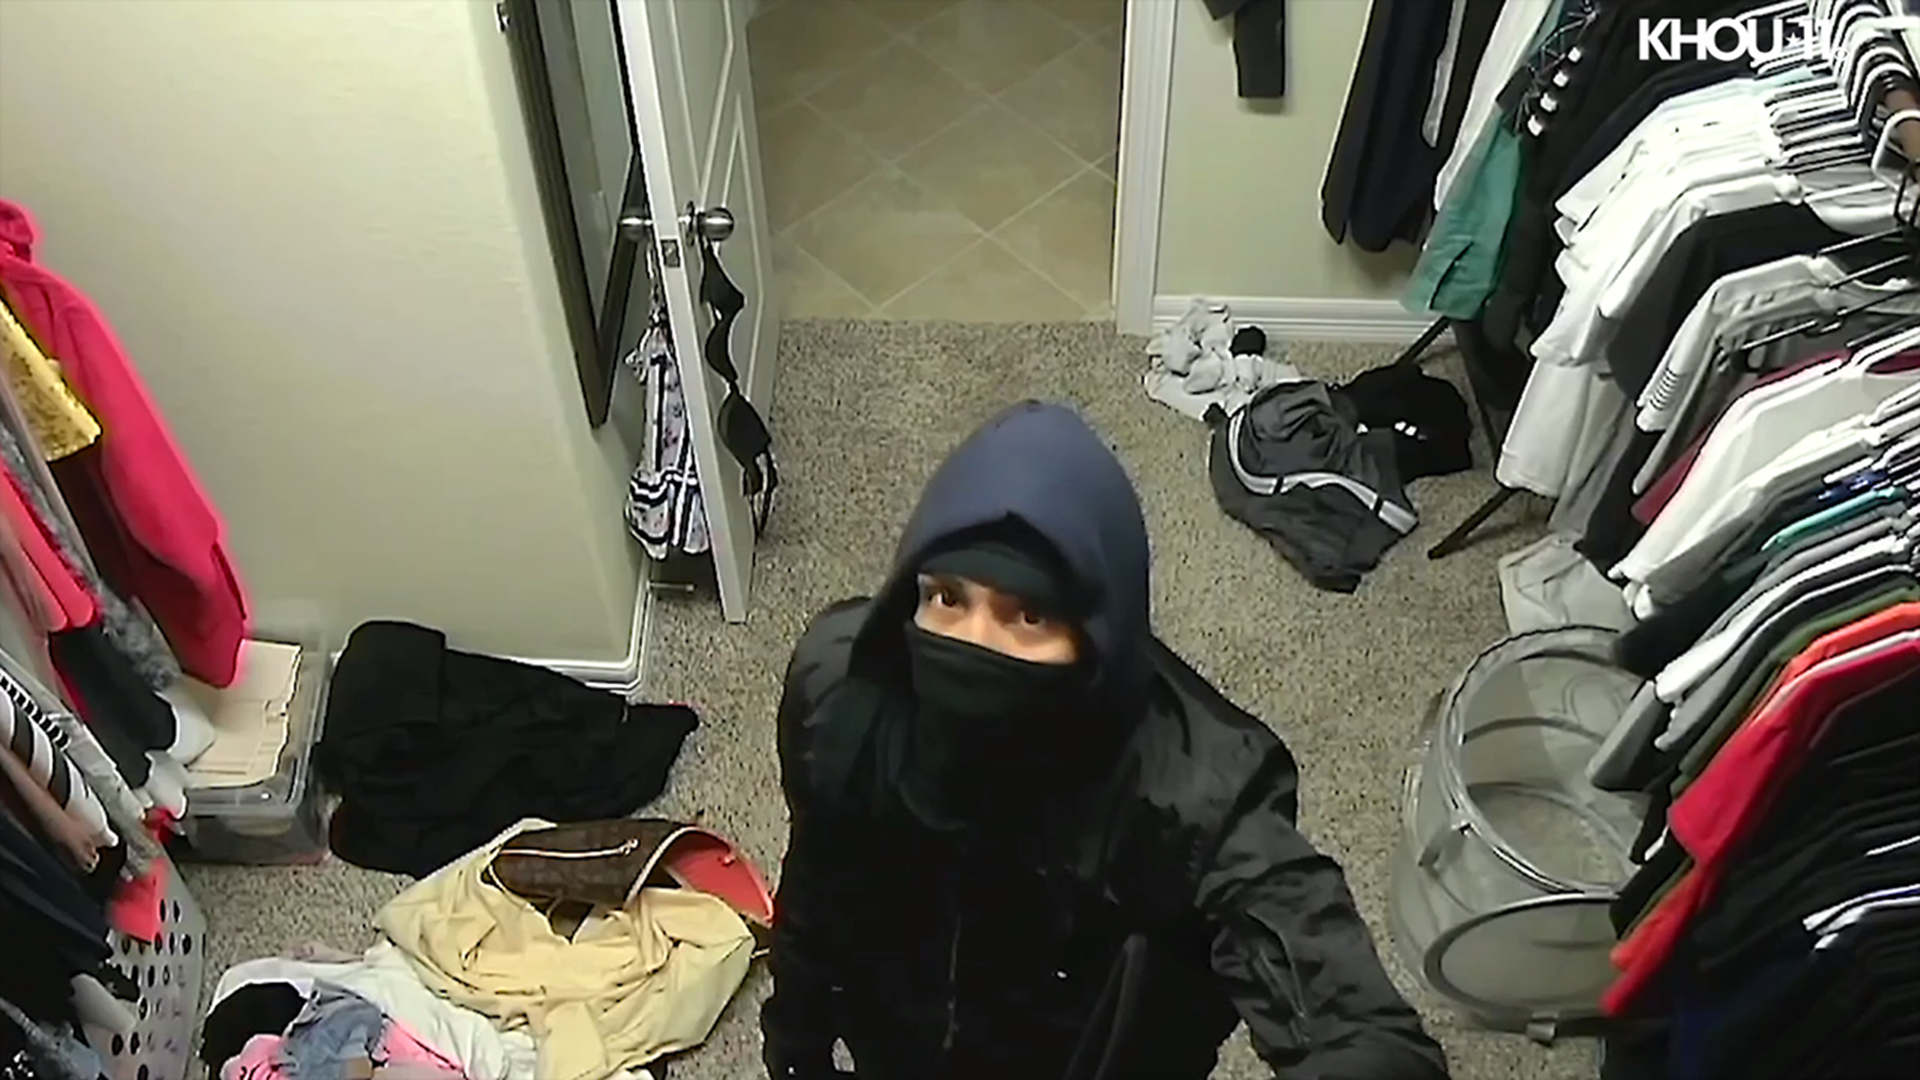 A burglar who knew what he was after was caught on camera rummaging through a closet at a Cypress home last month.